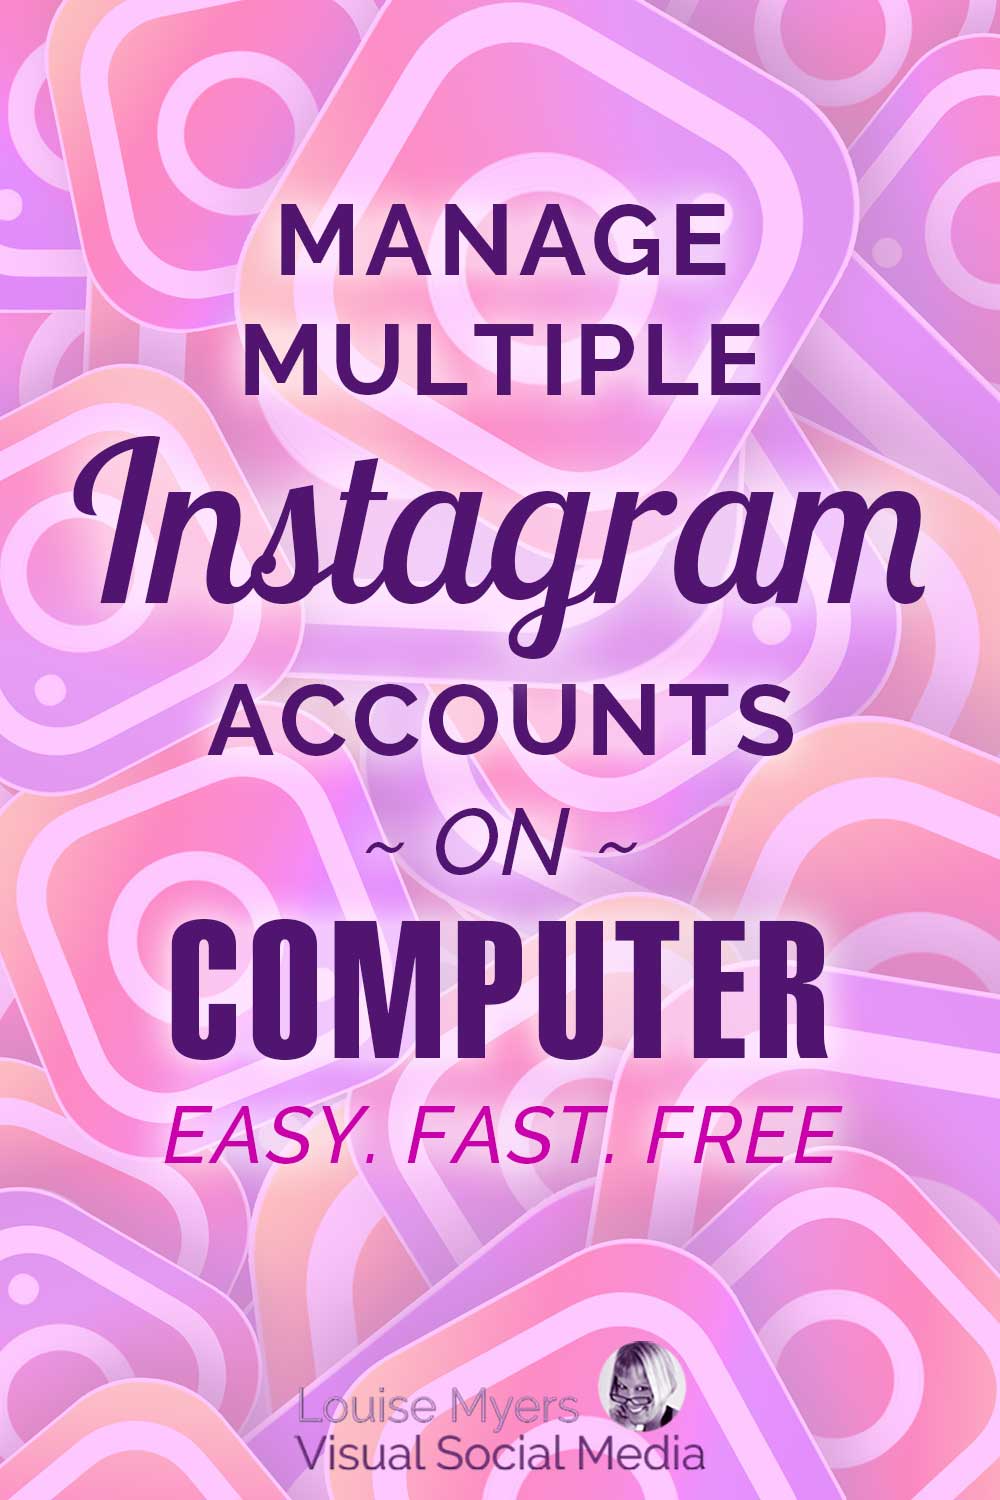 pink pin graphic says manage Instagram accounts on computer easy fast free over IG logos.